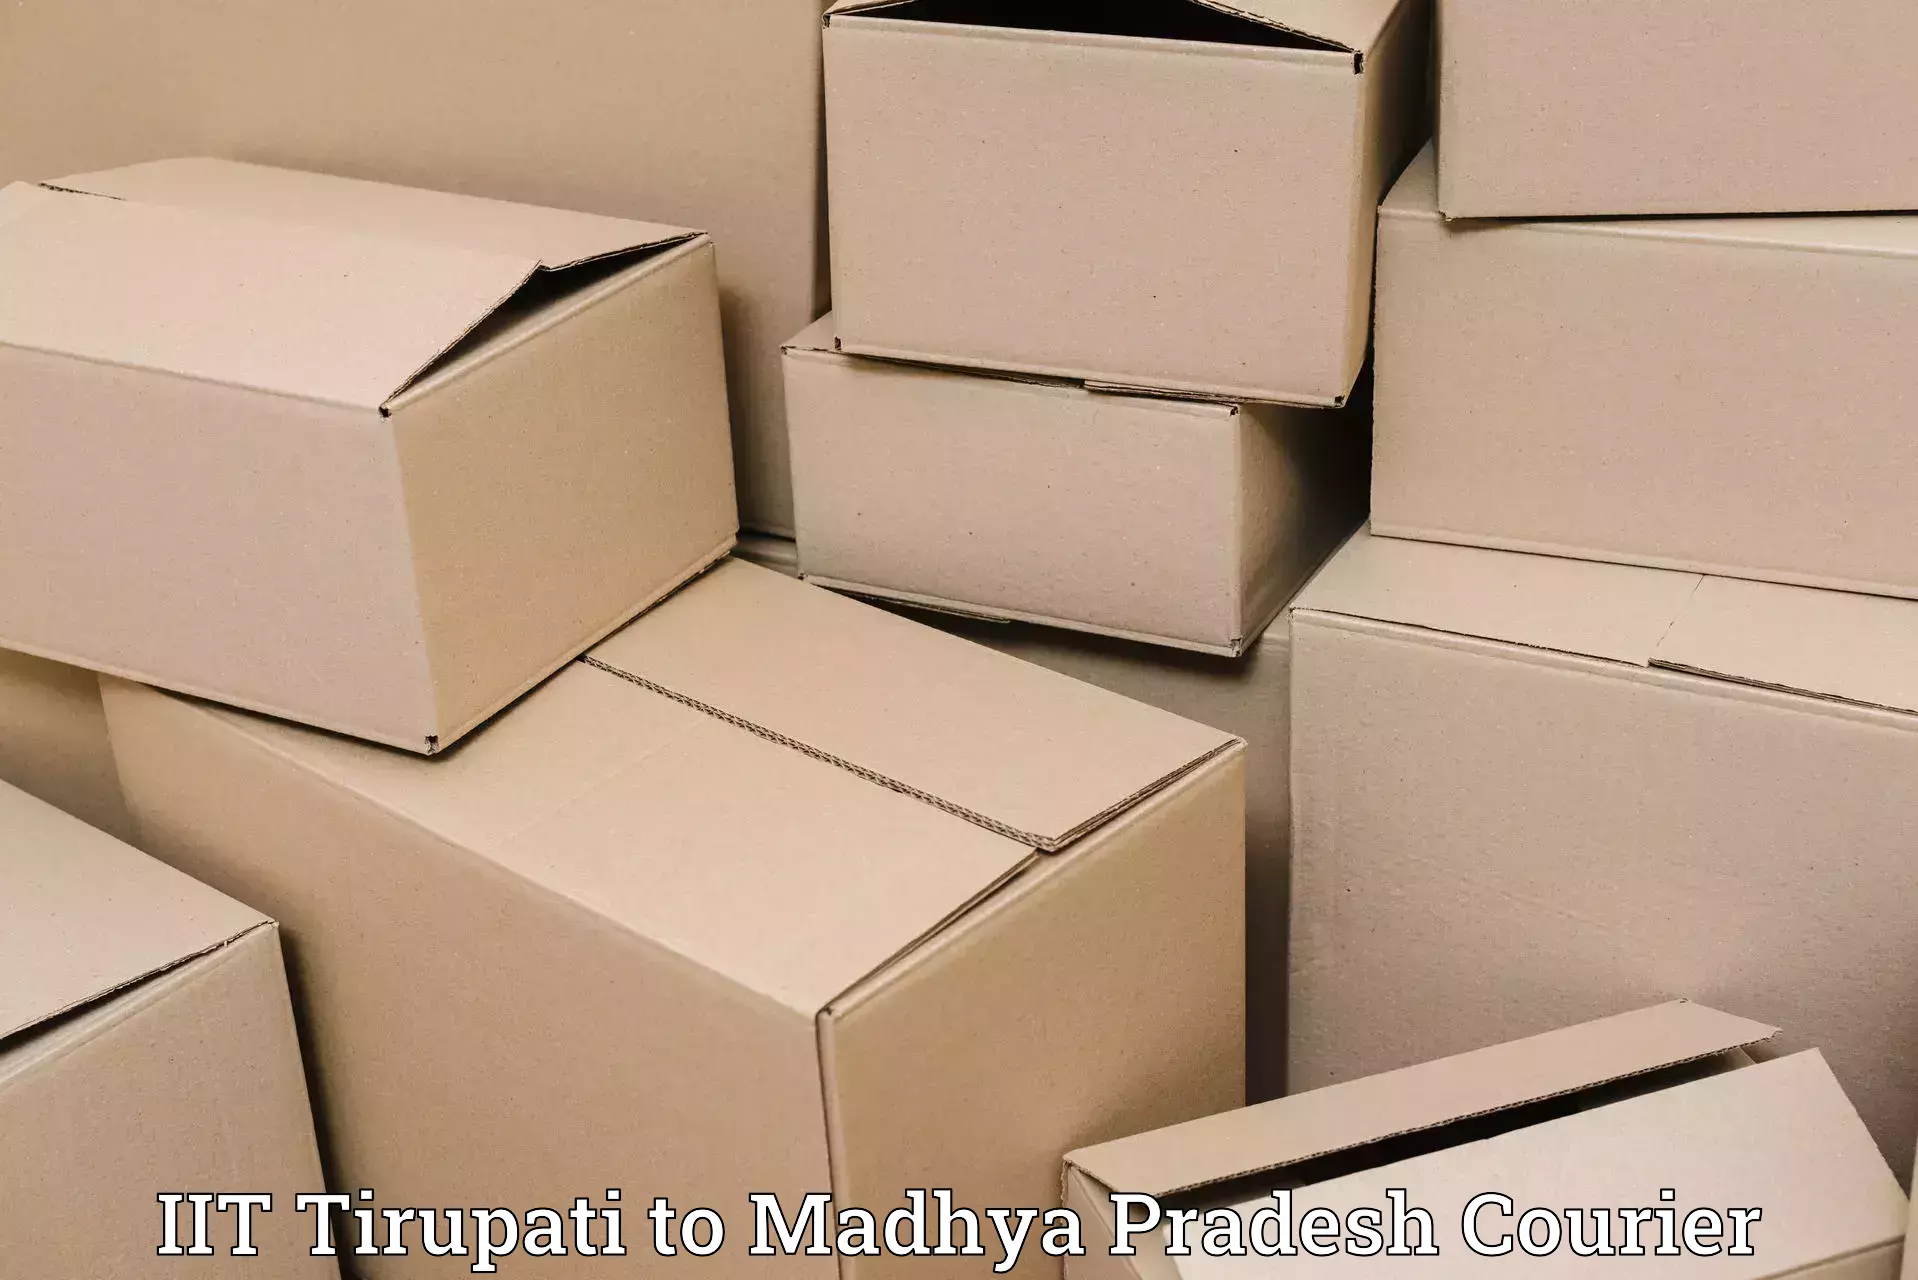 Multi-national courier services IIT Tirupati to Chandla